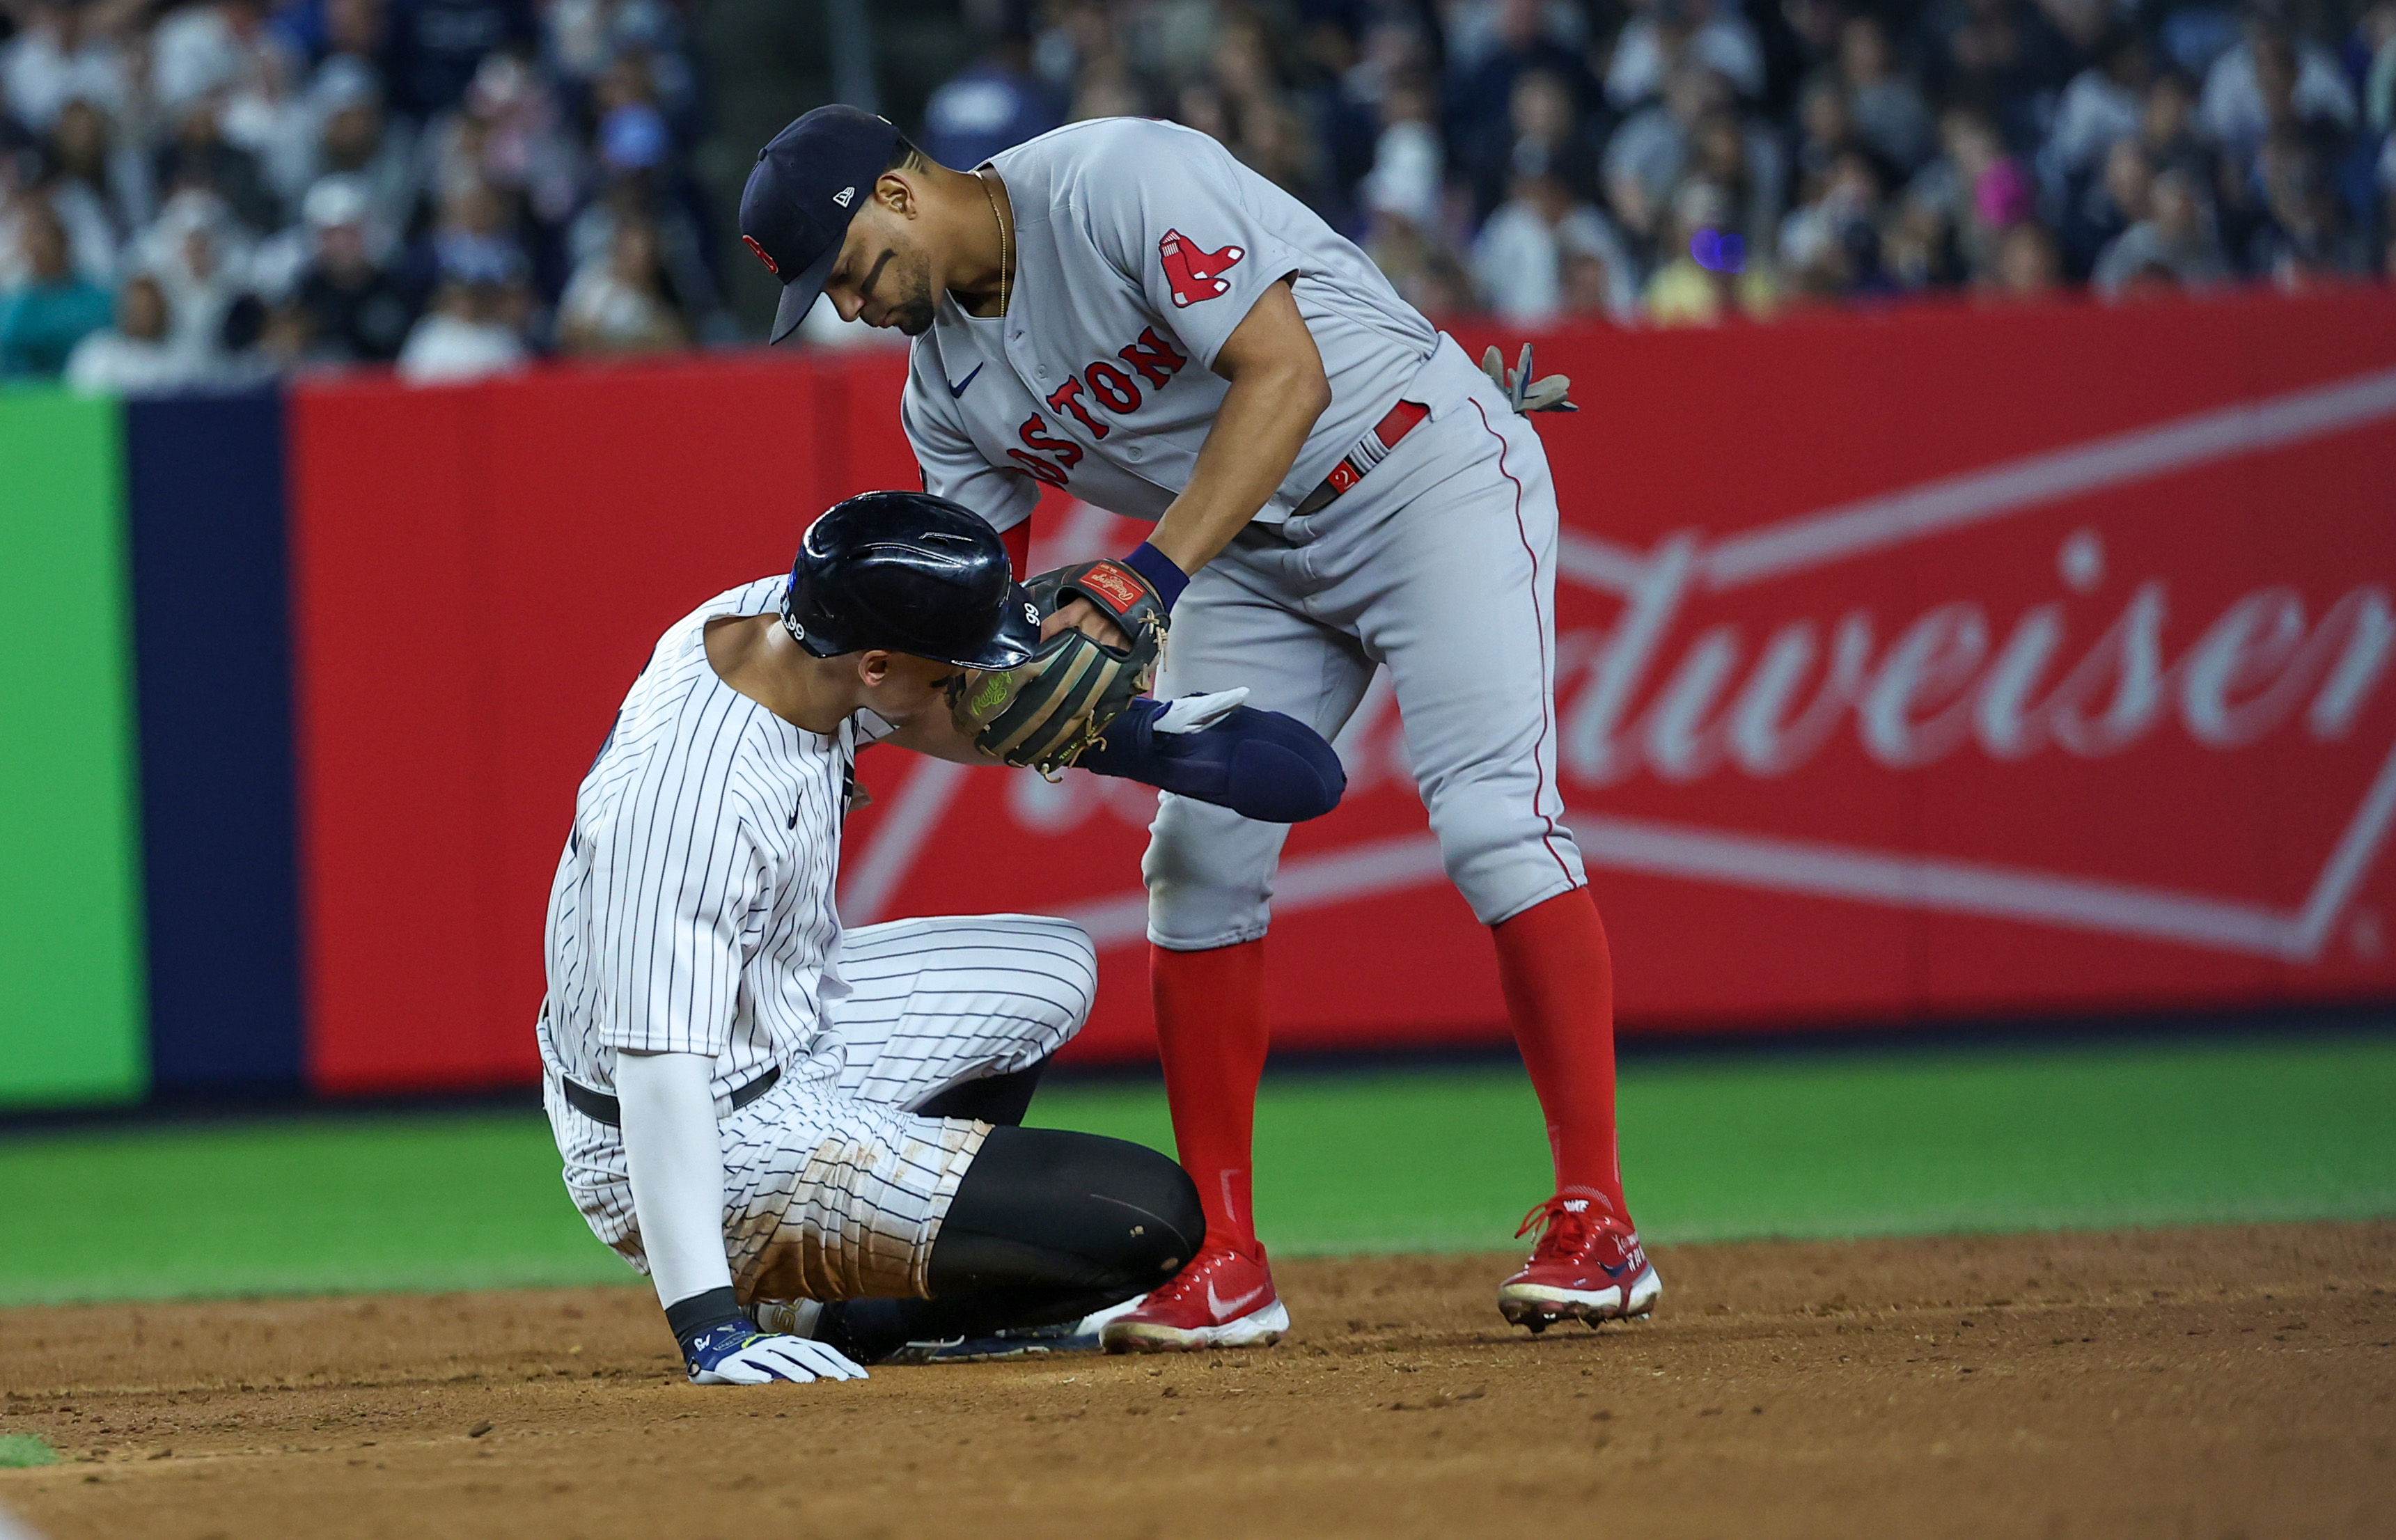 Judge blares 'New York, New York,' as Red Sox head to Bronx